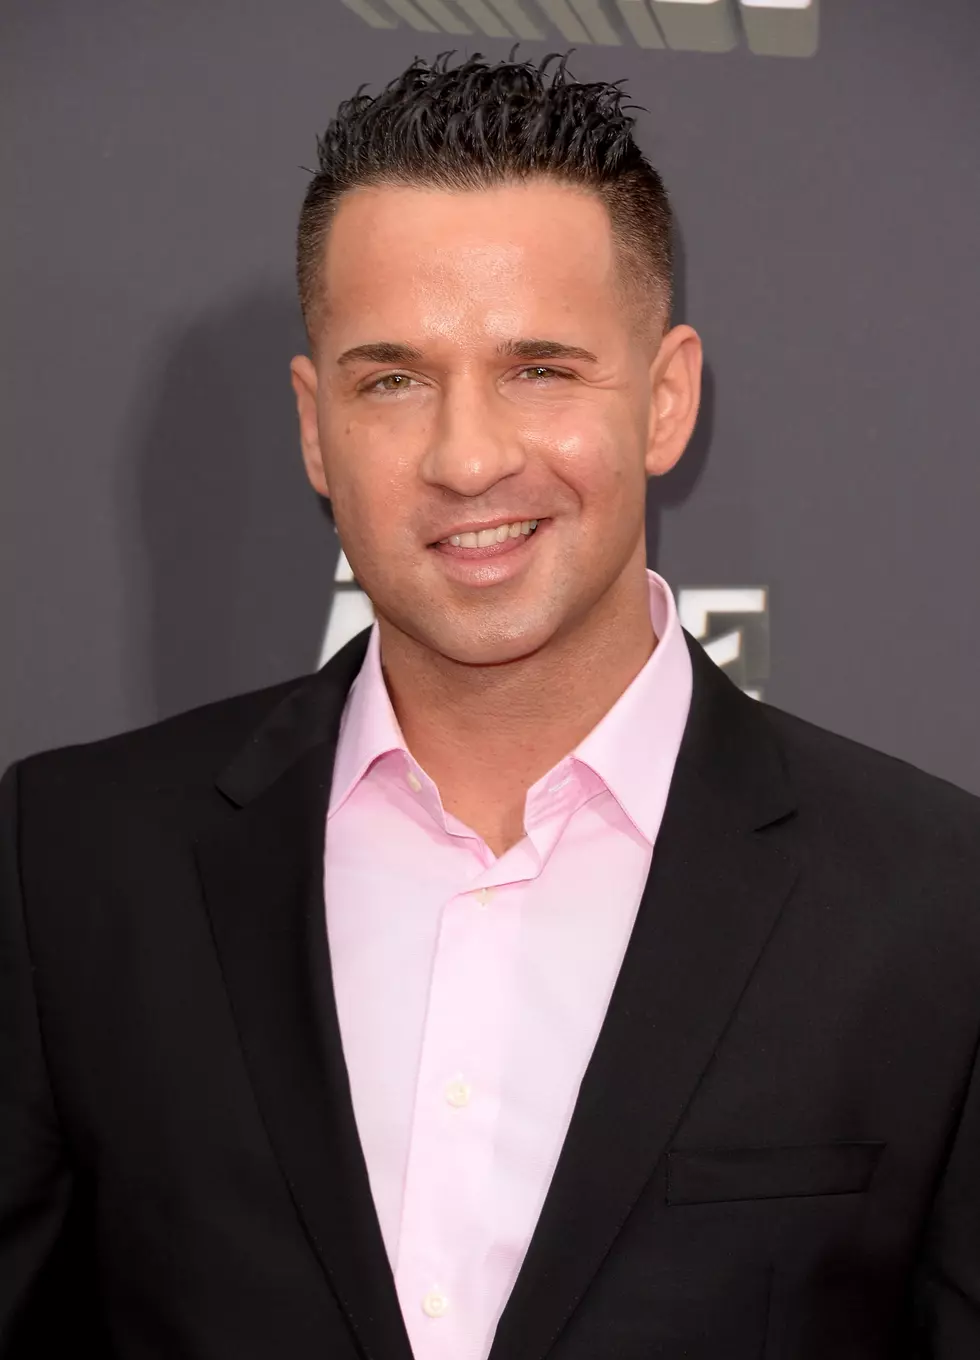 Mike ‘The Situation’ Sorrentino Talks New Reality Show, ‘Jersey Shore’ Memories